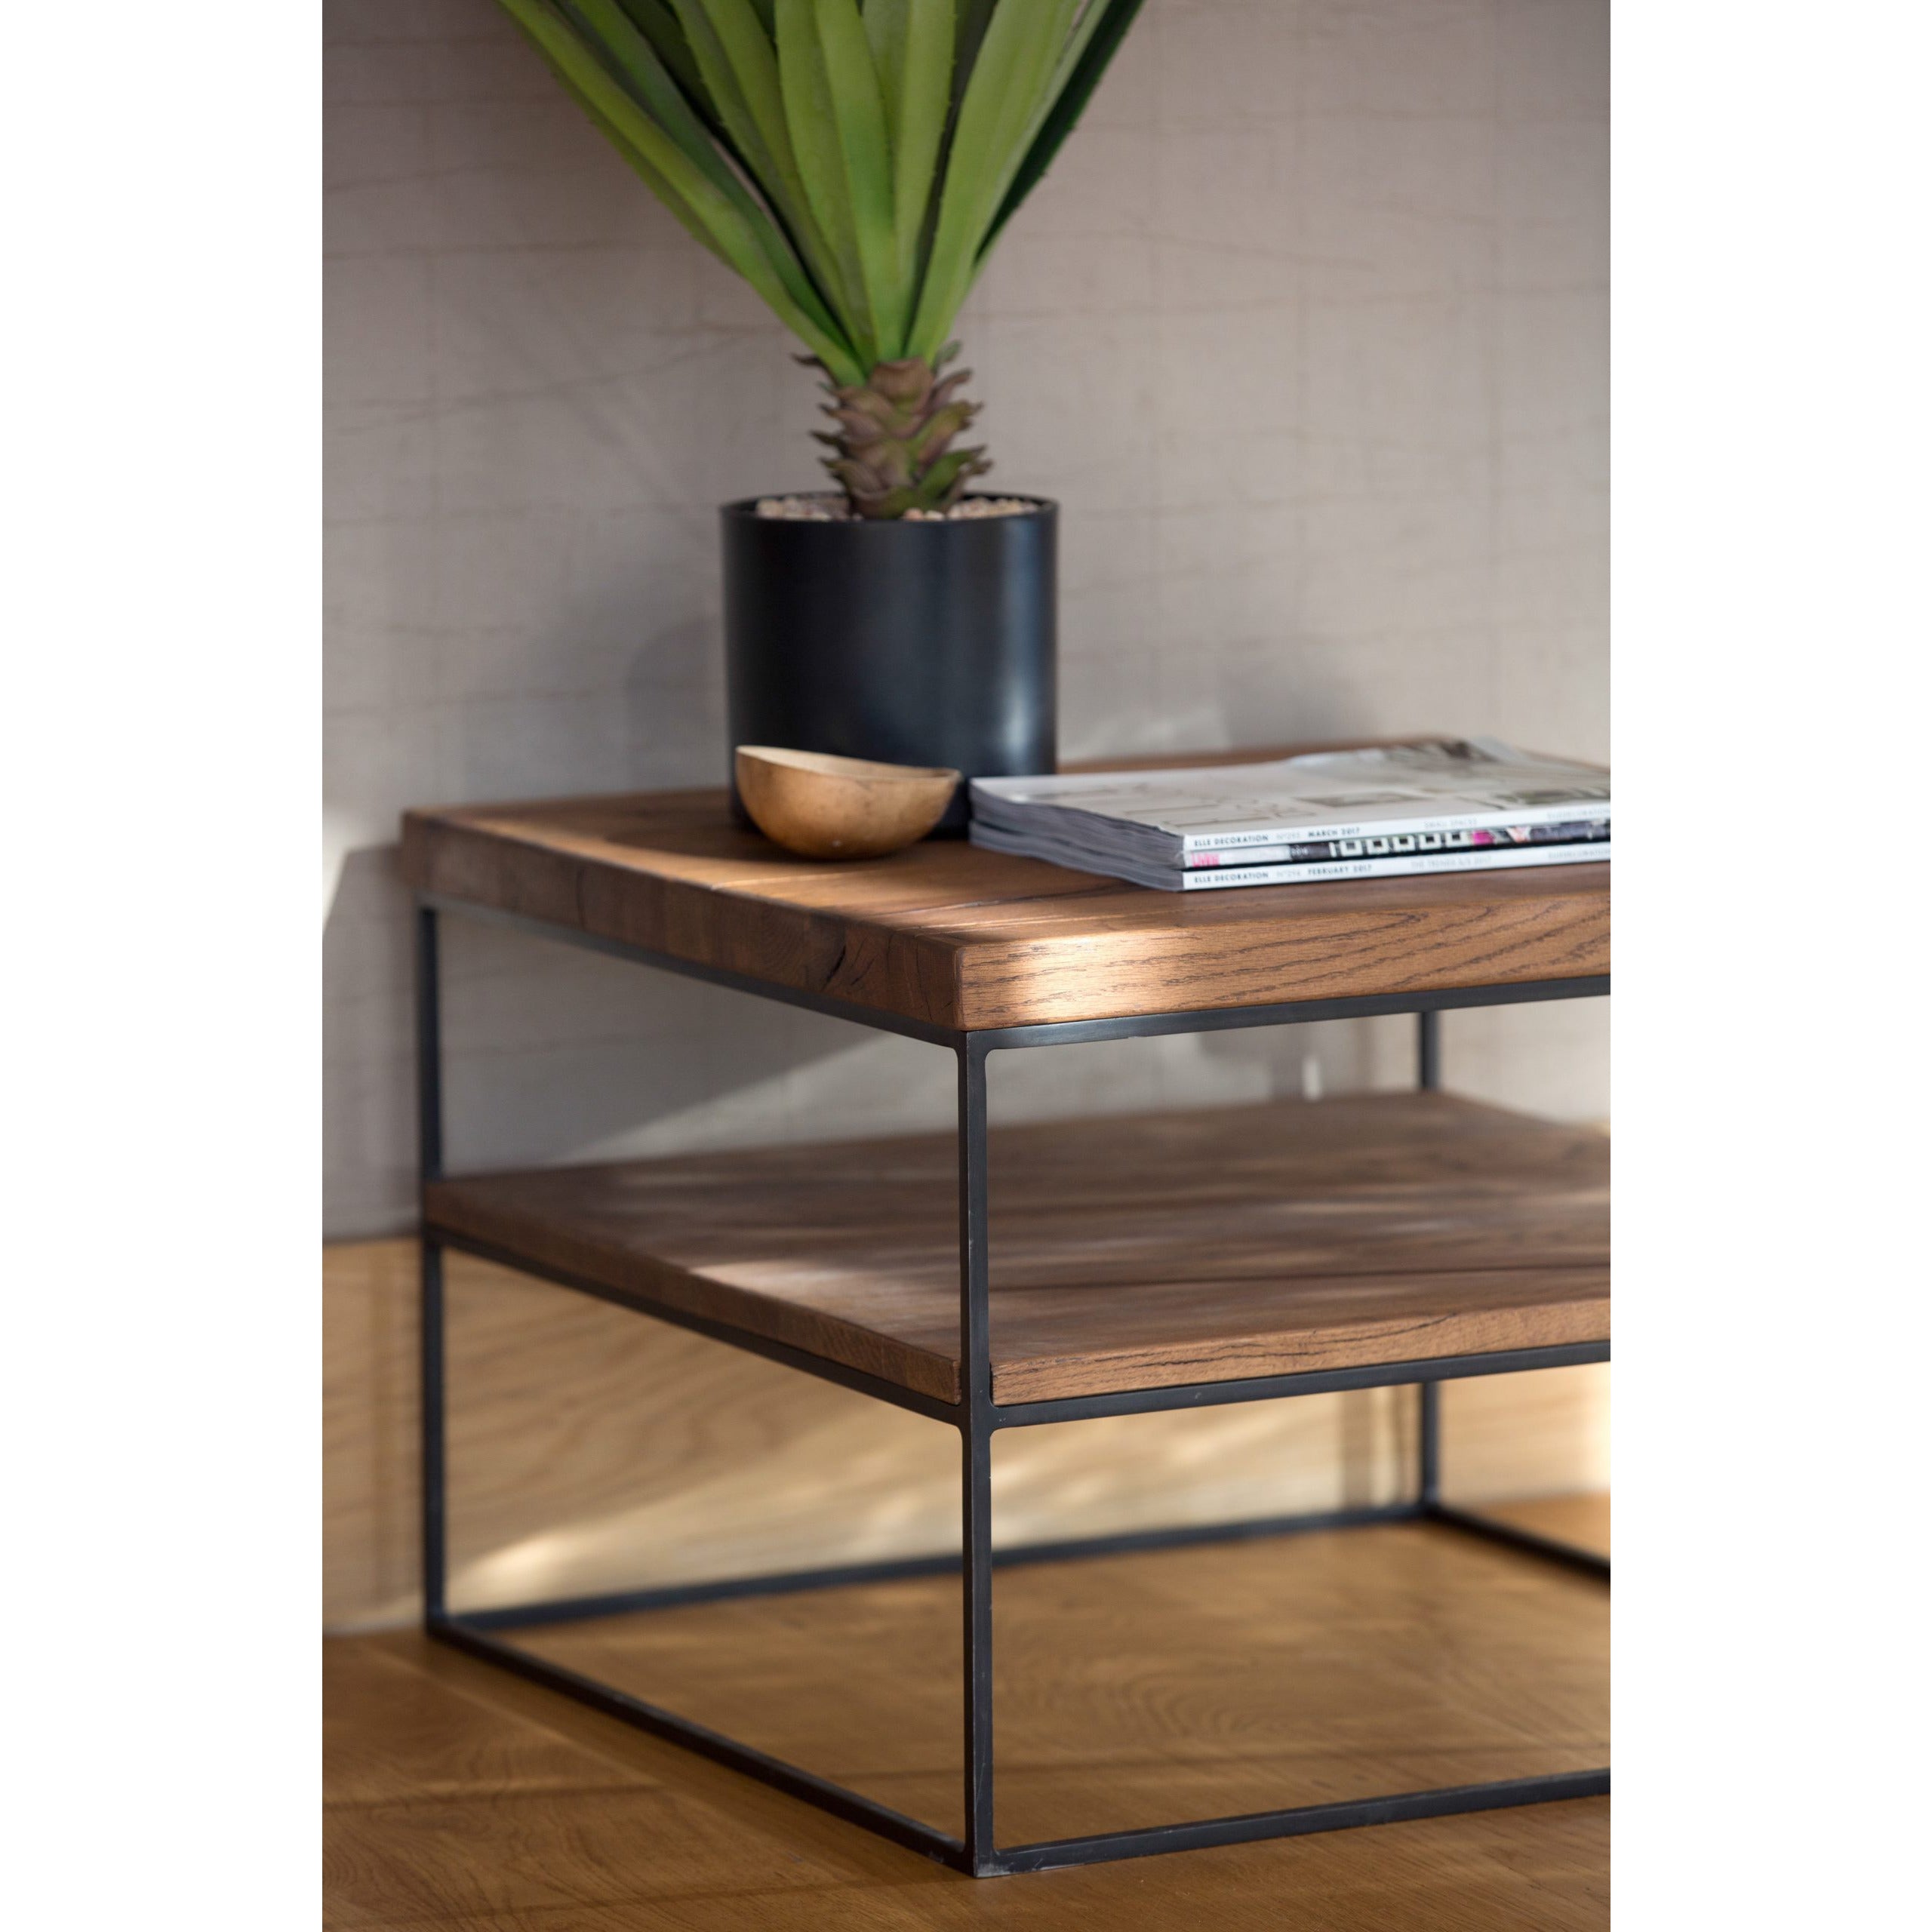 Soho Lamp Table from Upstairs Downstairs Furniture in Lisburn, Monaghan and Enniskillen